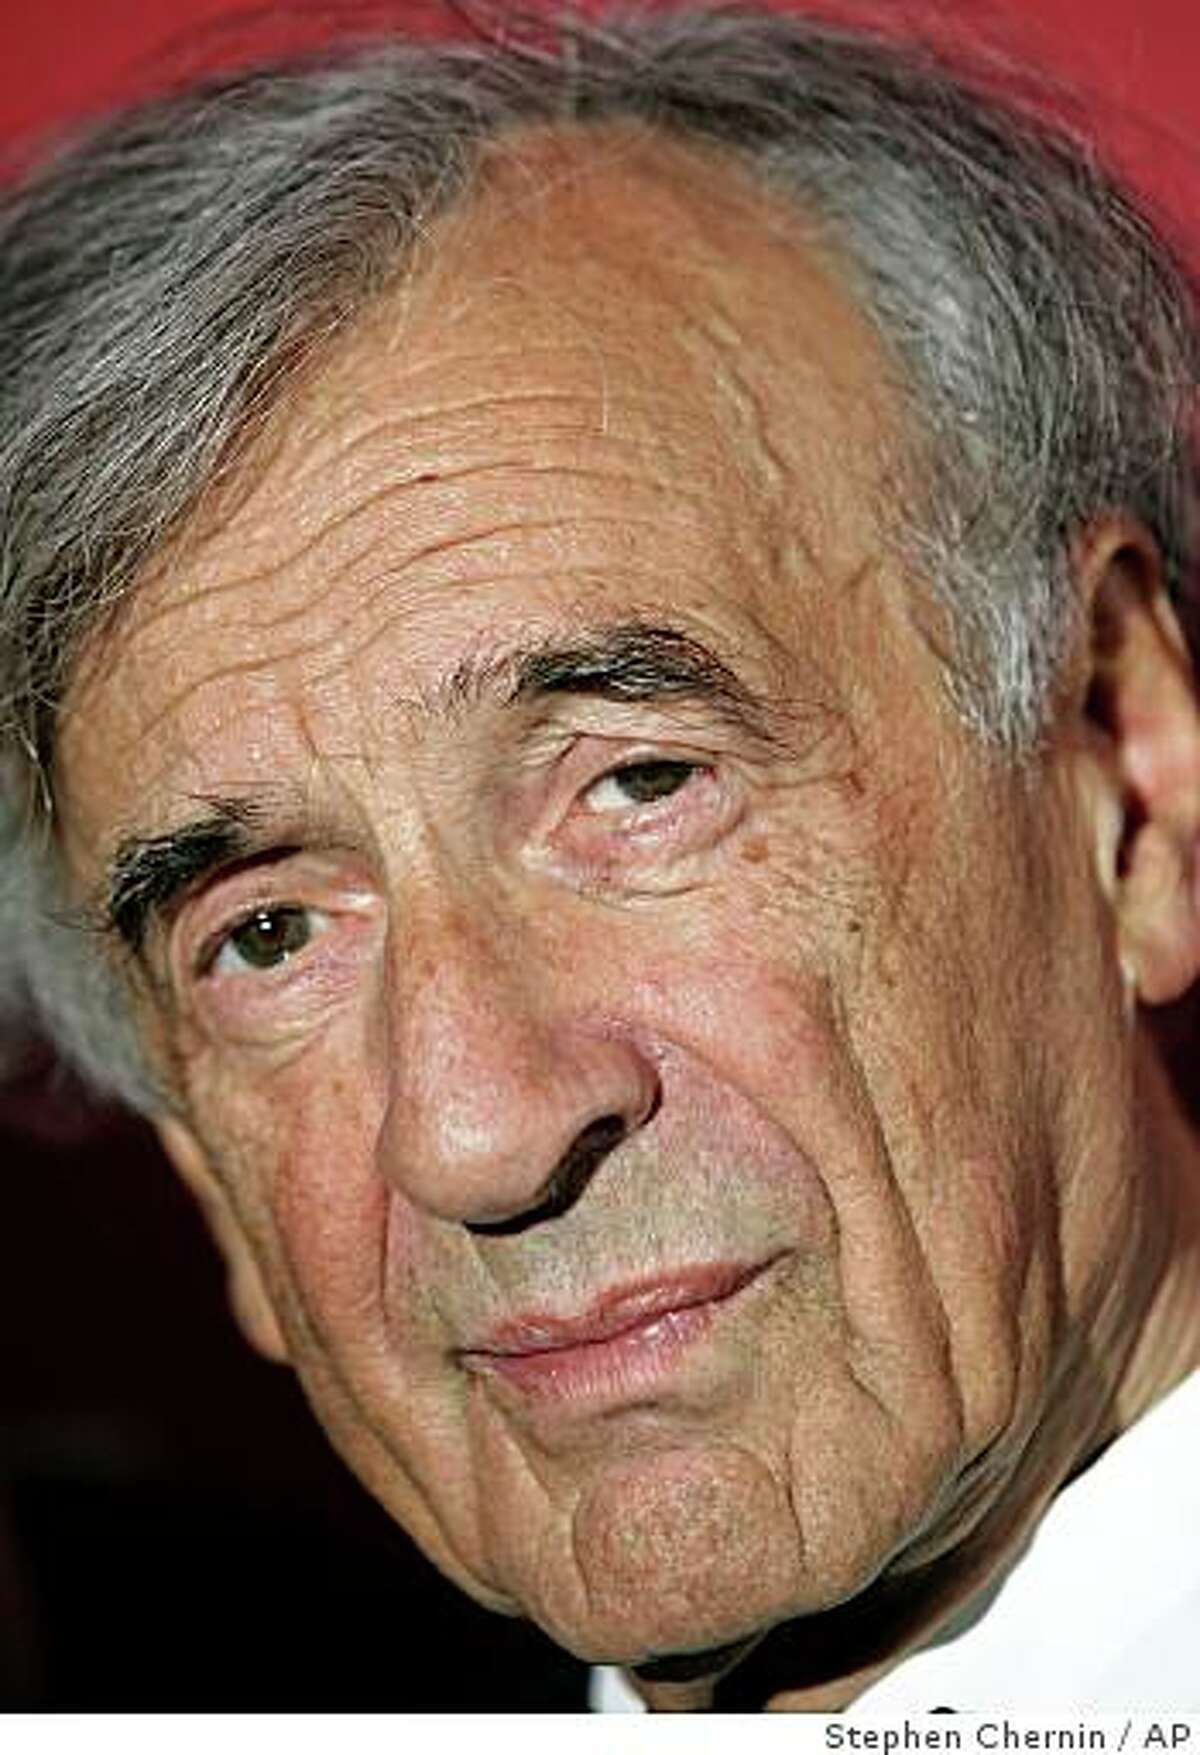 **FILE** Elie Wiesel, 1986 Nobel Prize winner arrives at the Time 100 gala, in this May 8, 2007 file photo at the Time Warner Center in New York. A man charged with dragging Wiesel from a hotel elevator apologized in court Monday Aug. 13, 2007 to the Nobel laureate over the alleged anti-Semitic attack. (AP Photo/Stephen Chernin,File)